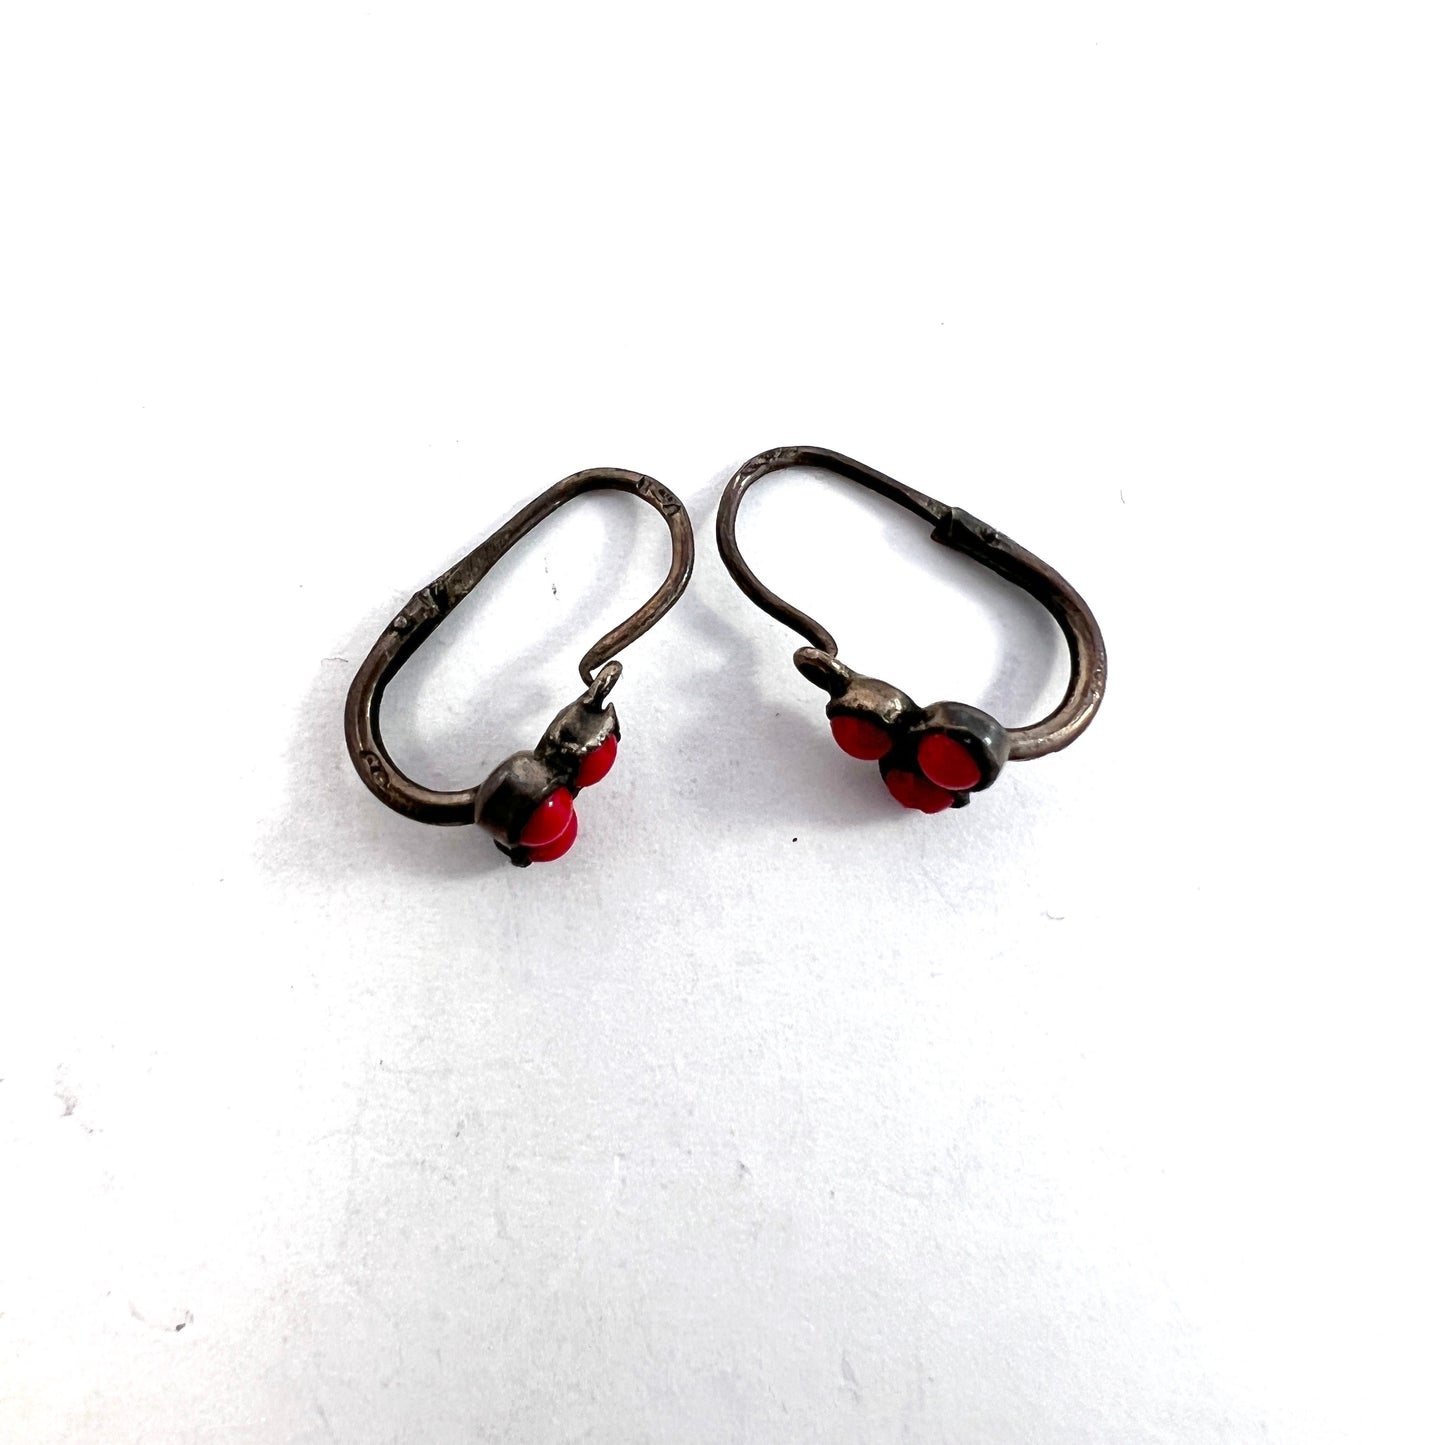 Antique c year 1900. Solid Silver Red Paste Earrings.